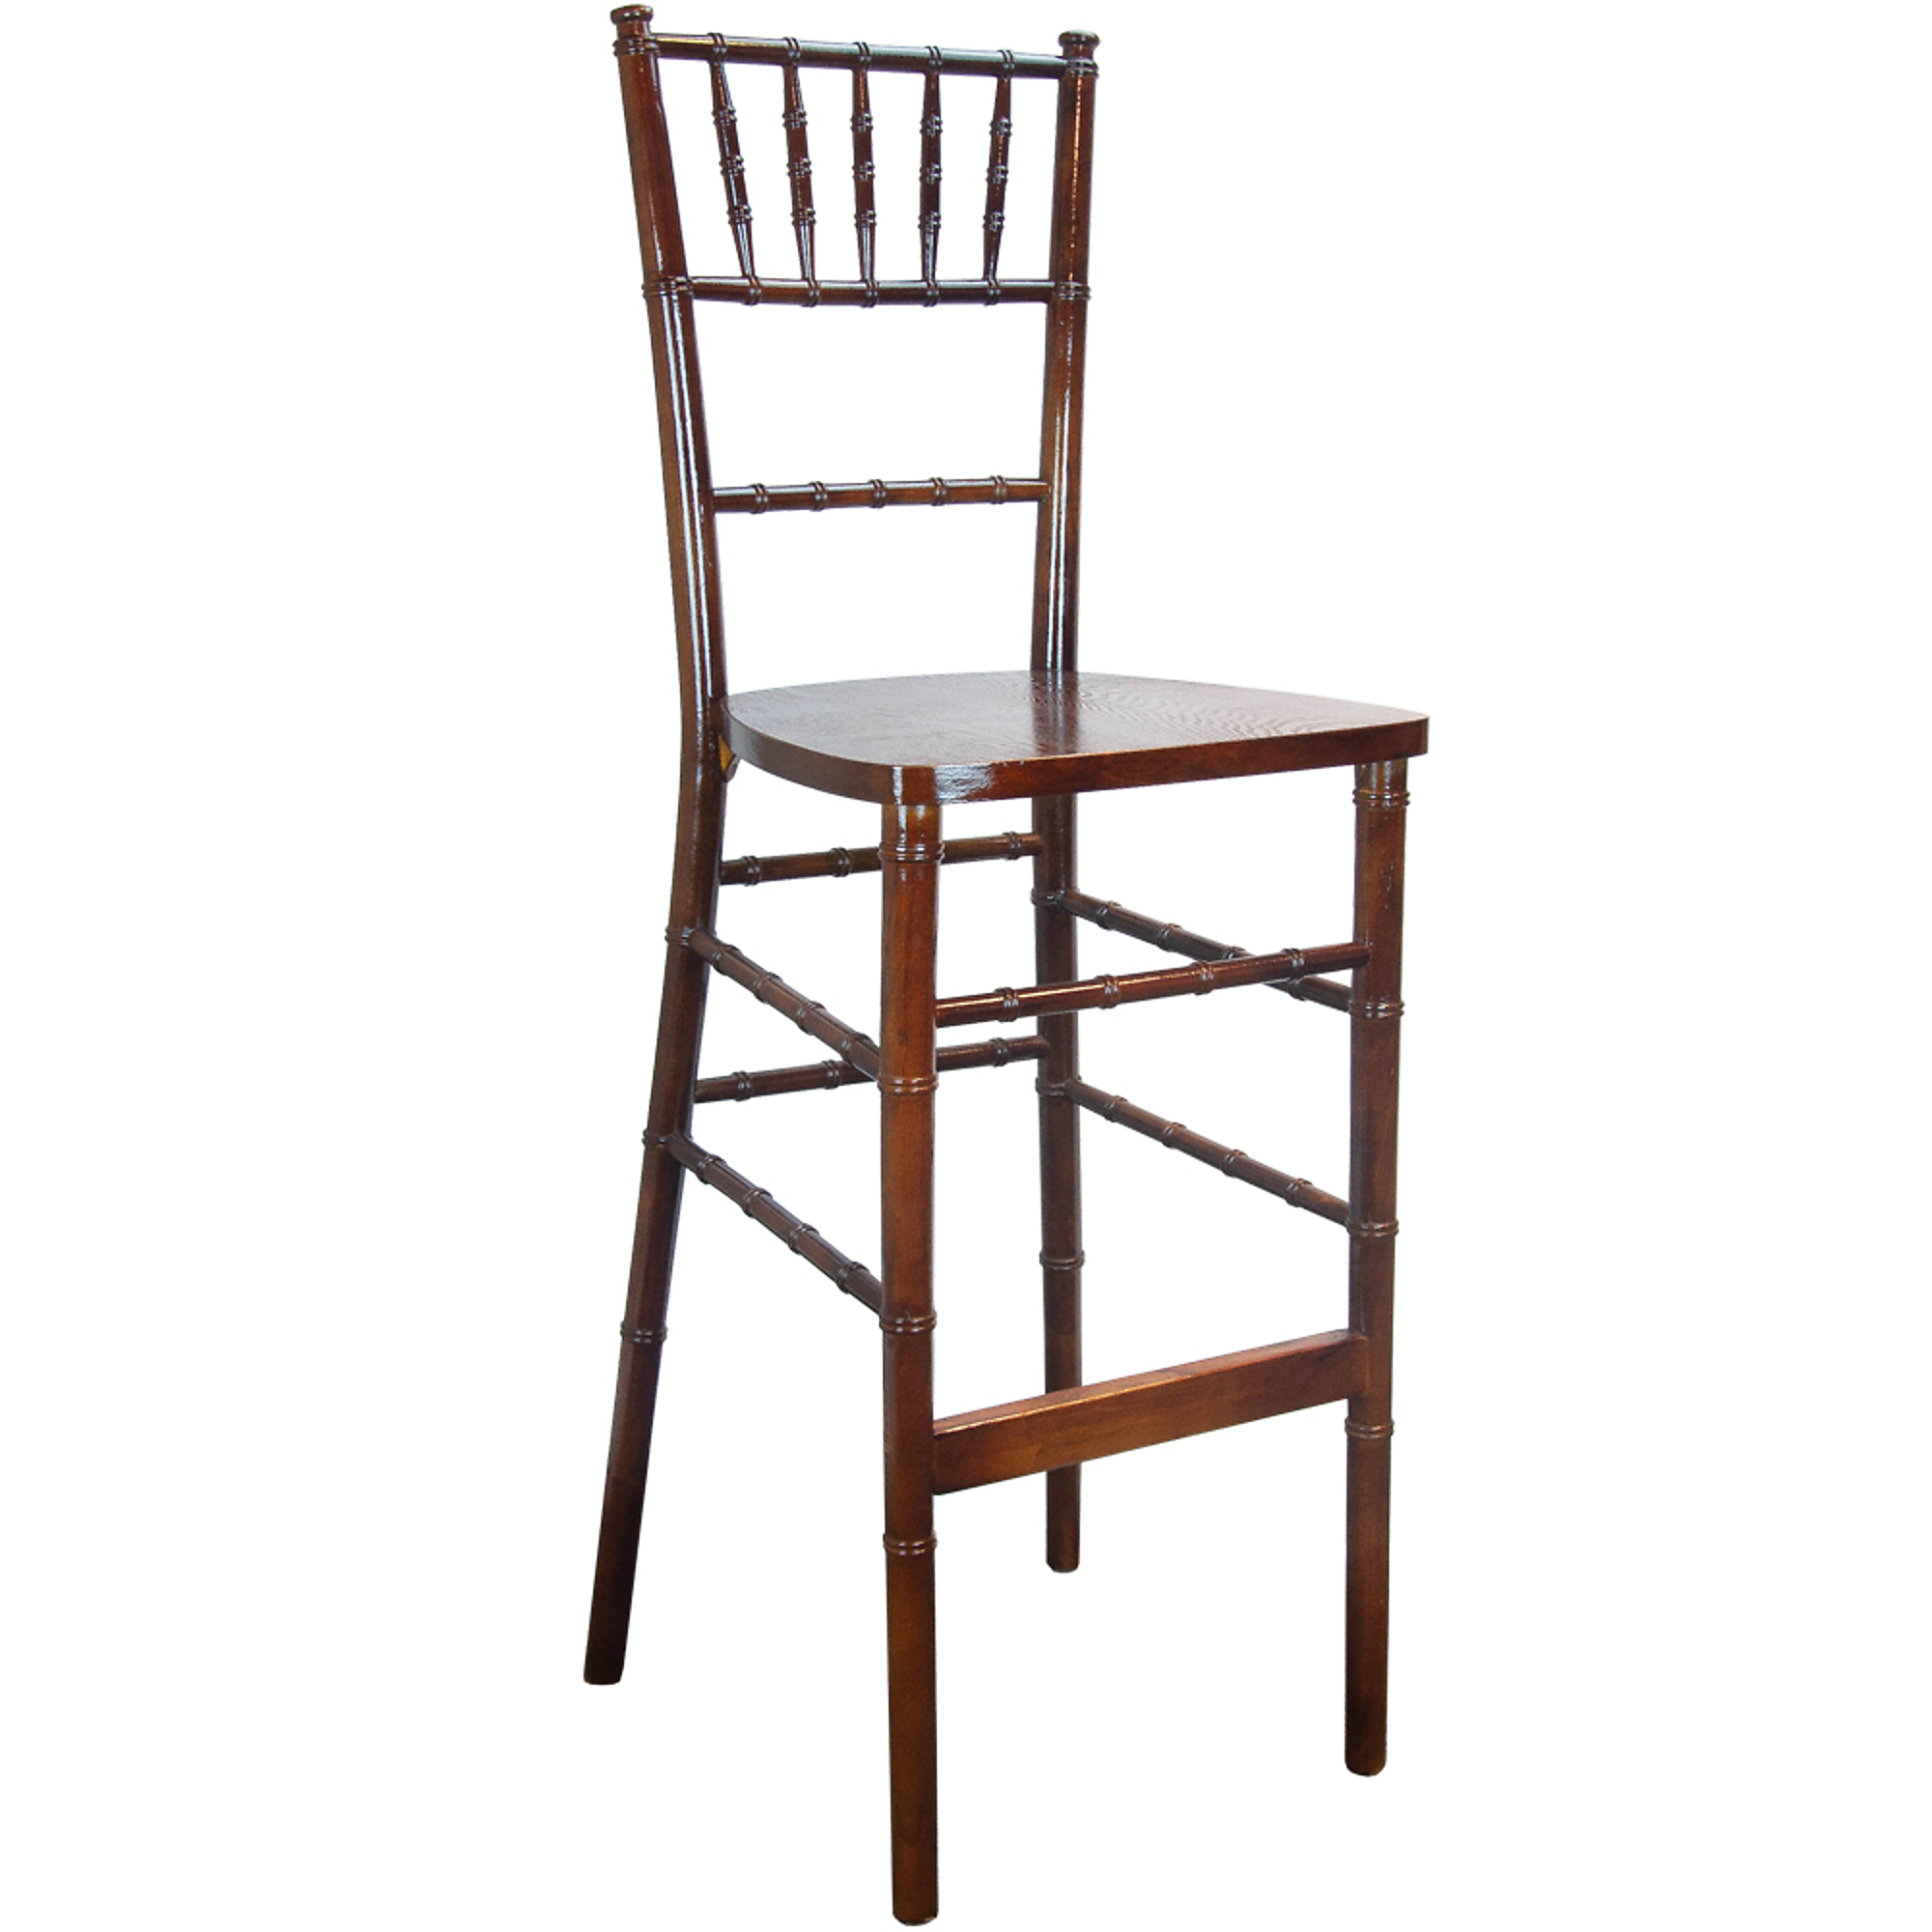 Flash Furniture, Fruitwood Chiavari Bar Stools, Primary Color Brown, Included (qty.) 1, Model WDCHIBARFRUITWD